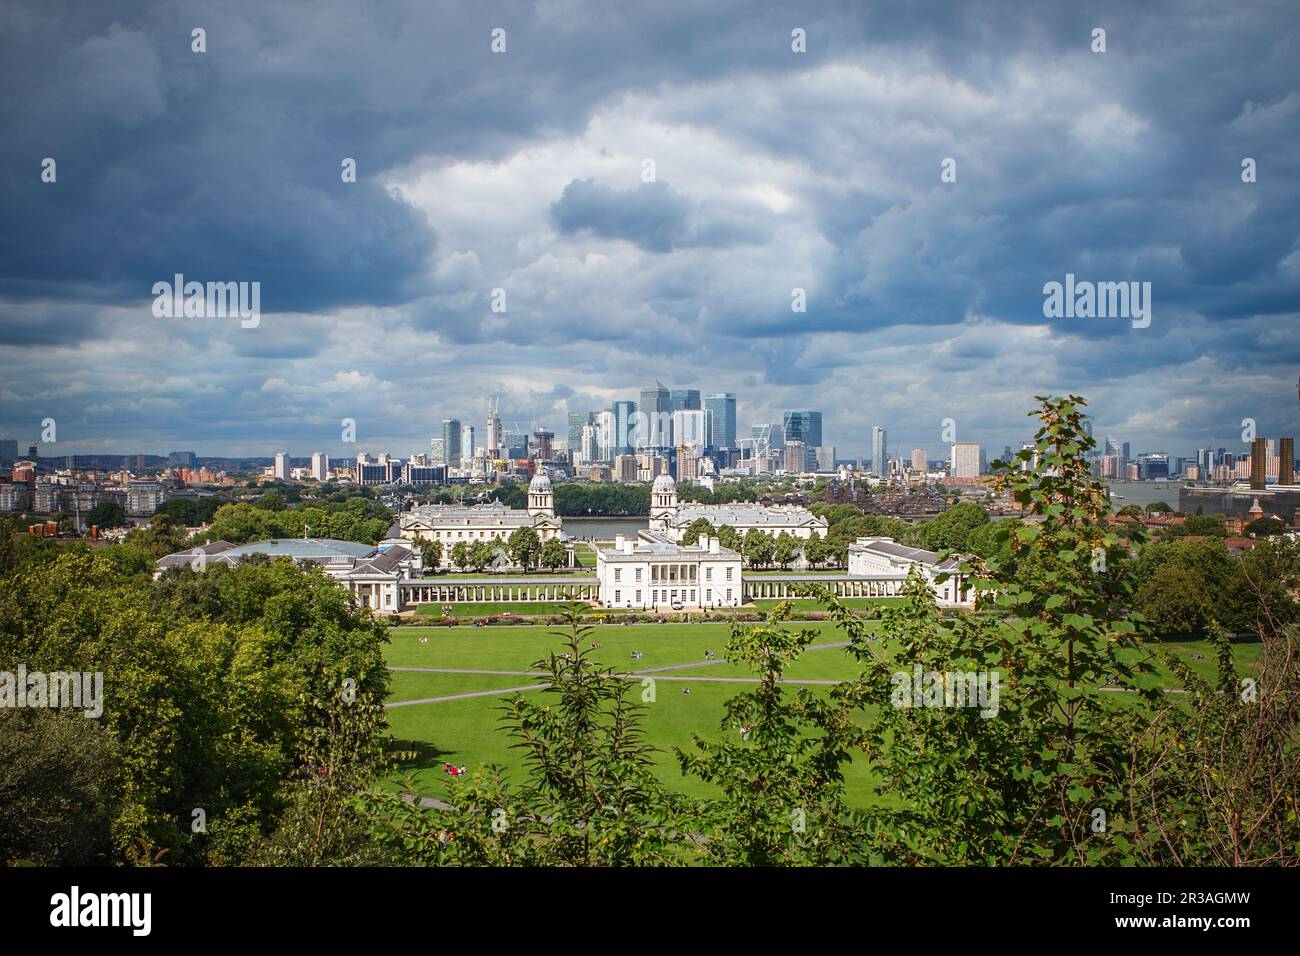 LONDON, UK - AUGUST 19, 2017 - London City skyline from Greenwich Observatory looking over the park, Stock Photo